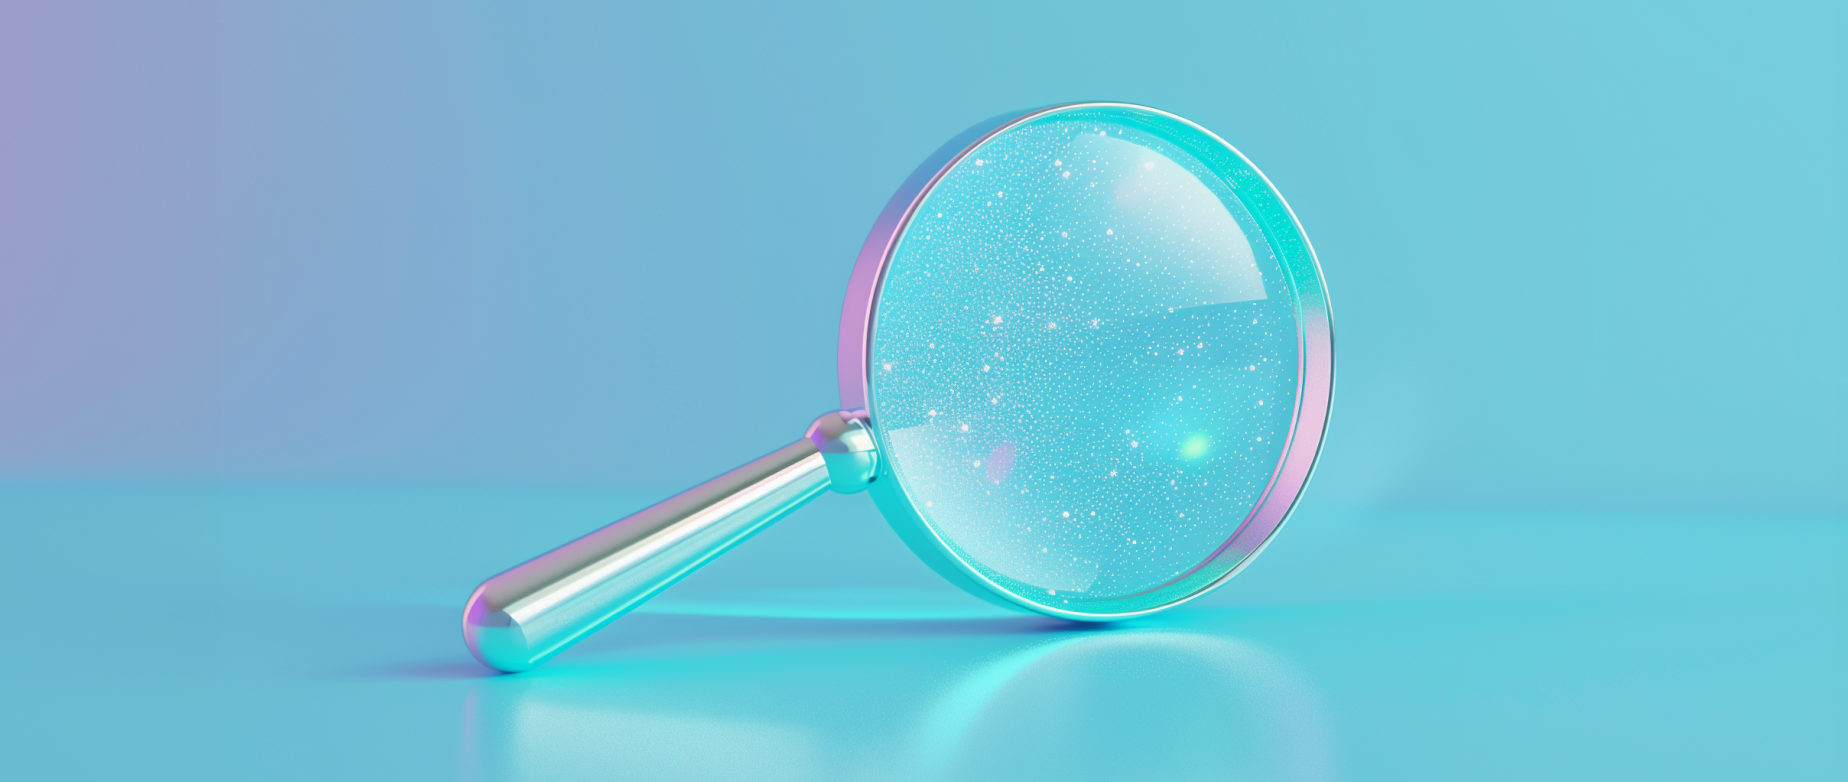 A silver magnifying glass on a blue background.